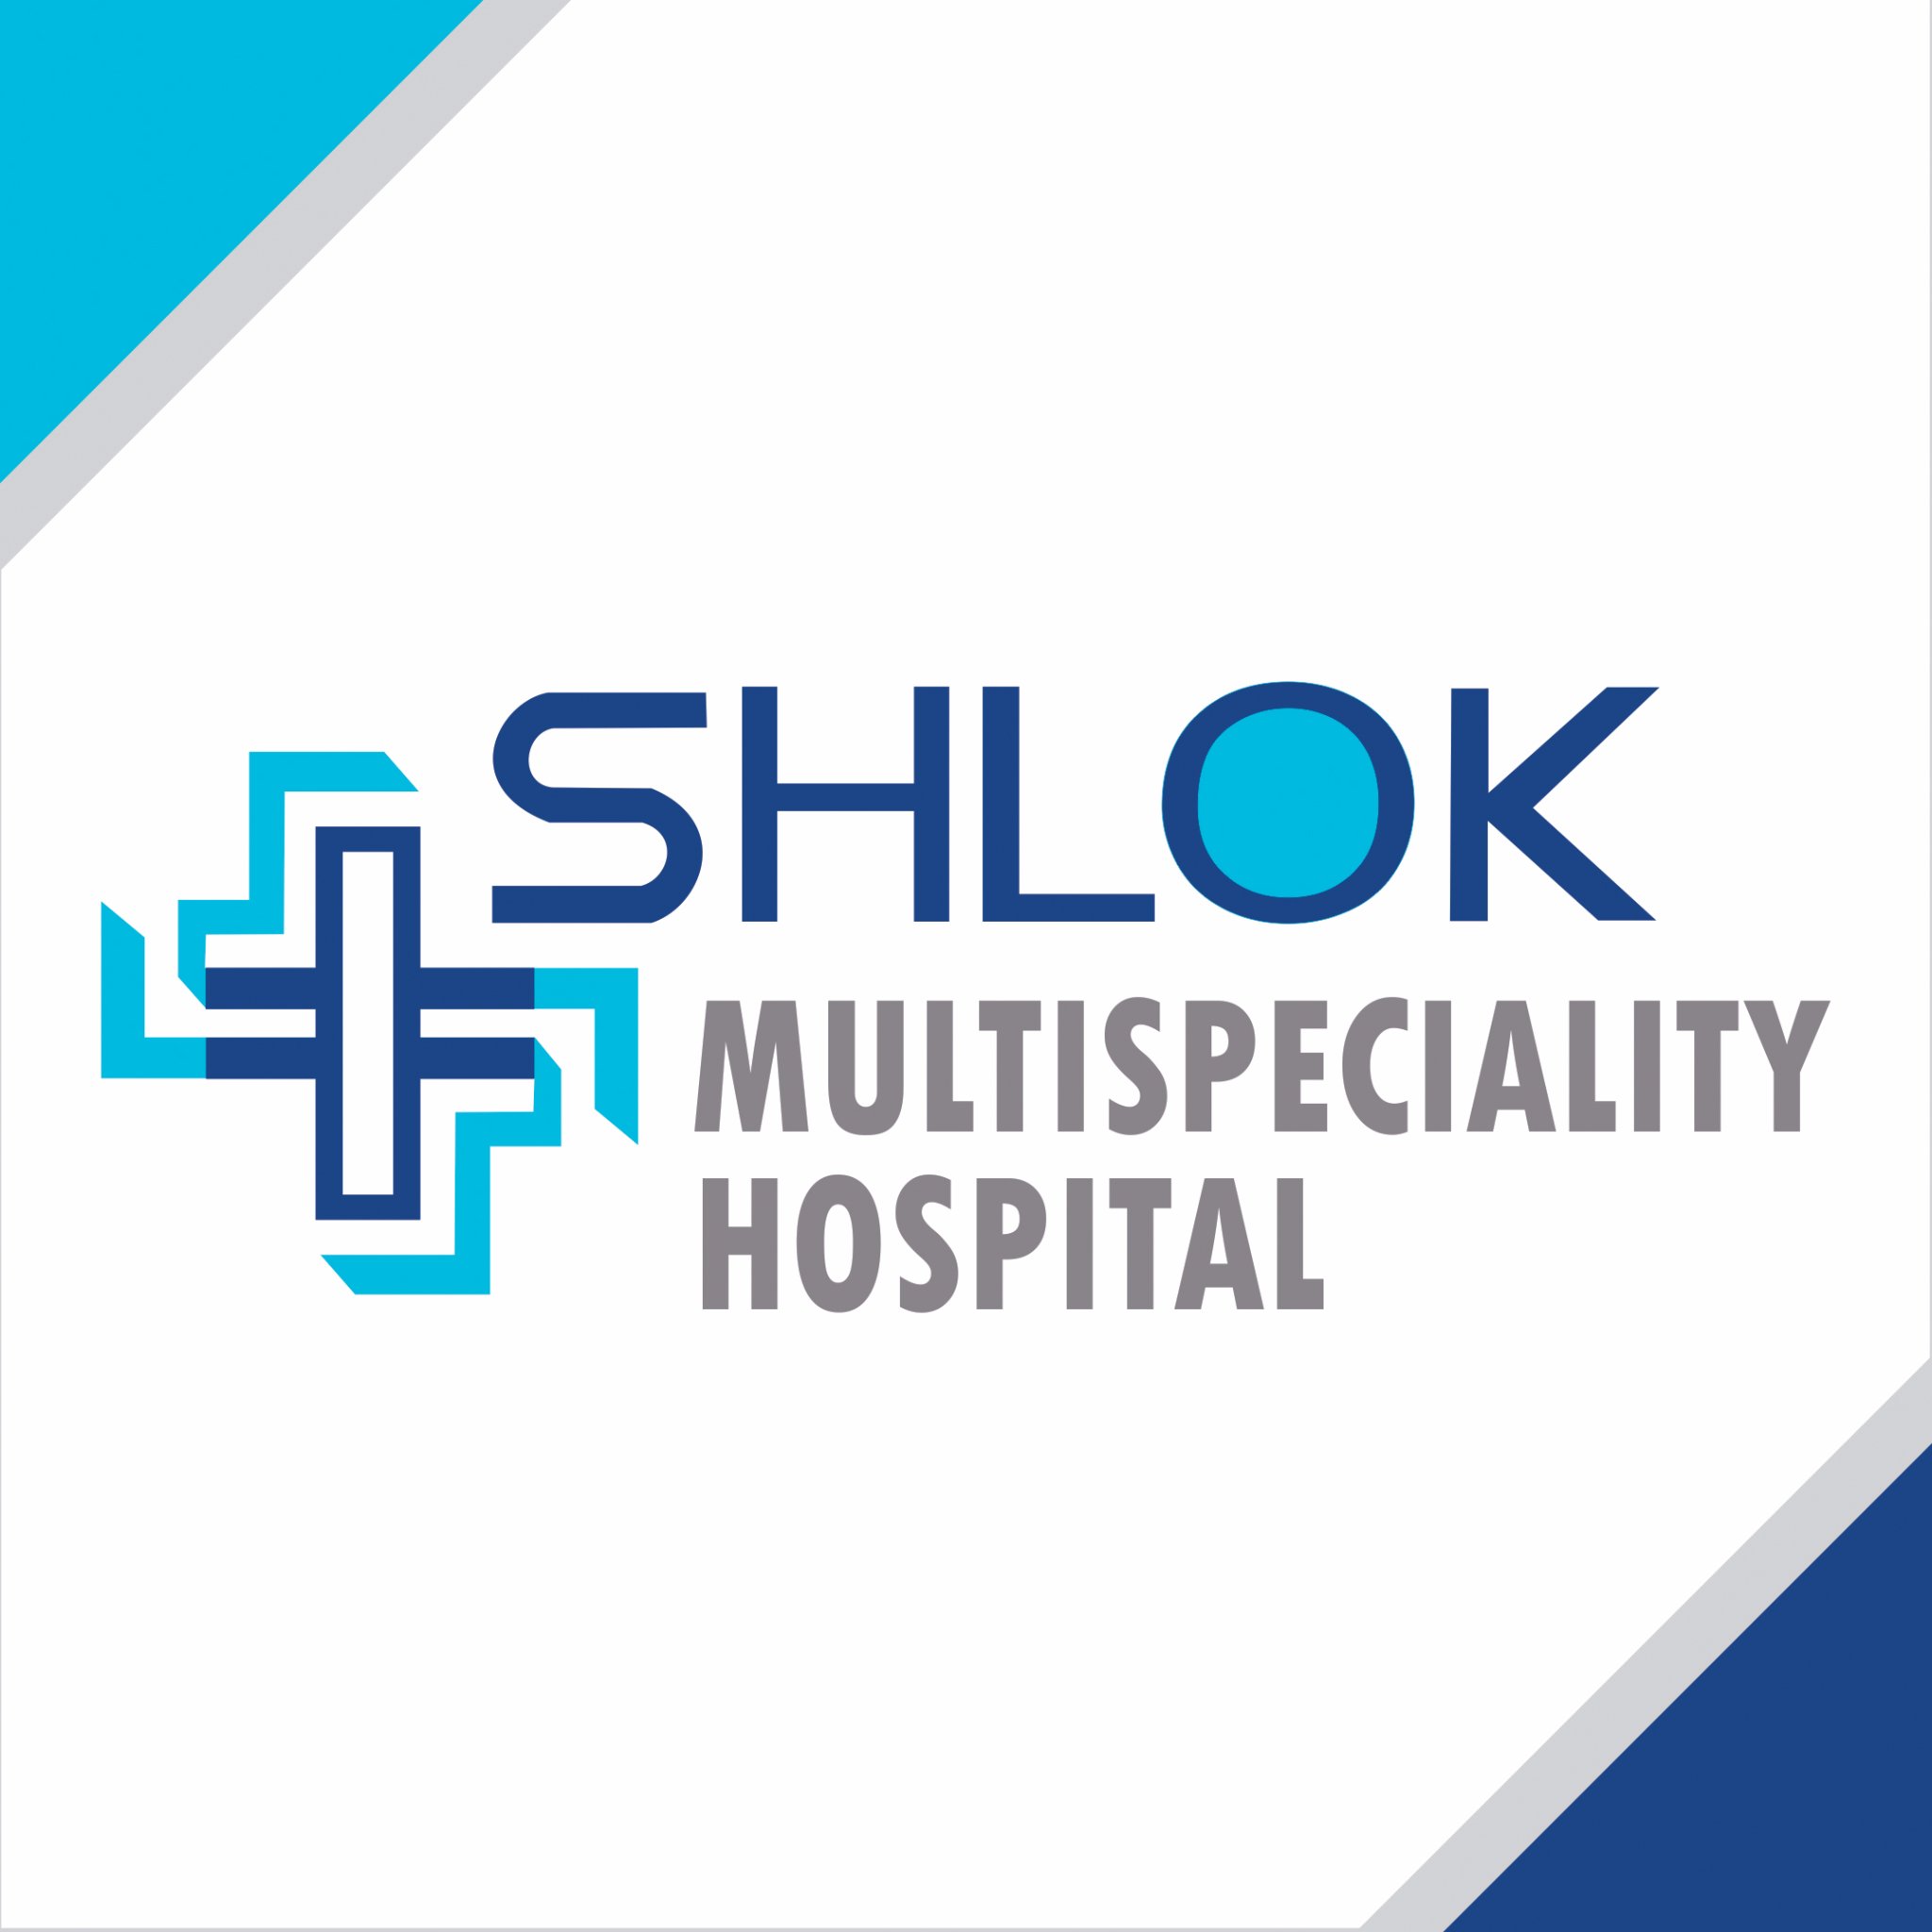 Shlok Multispeciality Hospital is committed to excellence utility and provides the highest standard of clinical skills and nursing care.